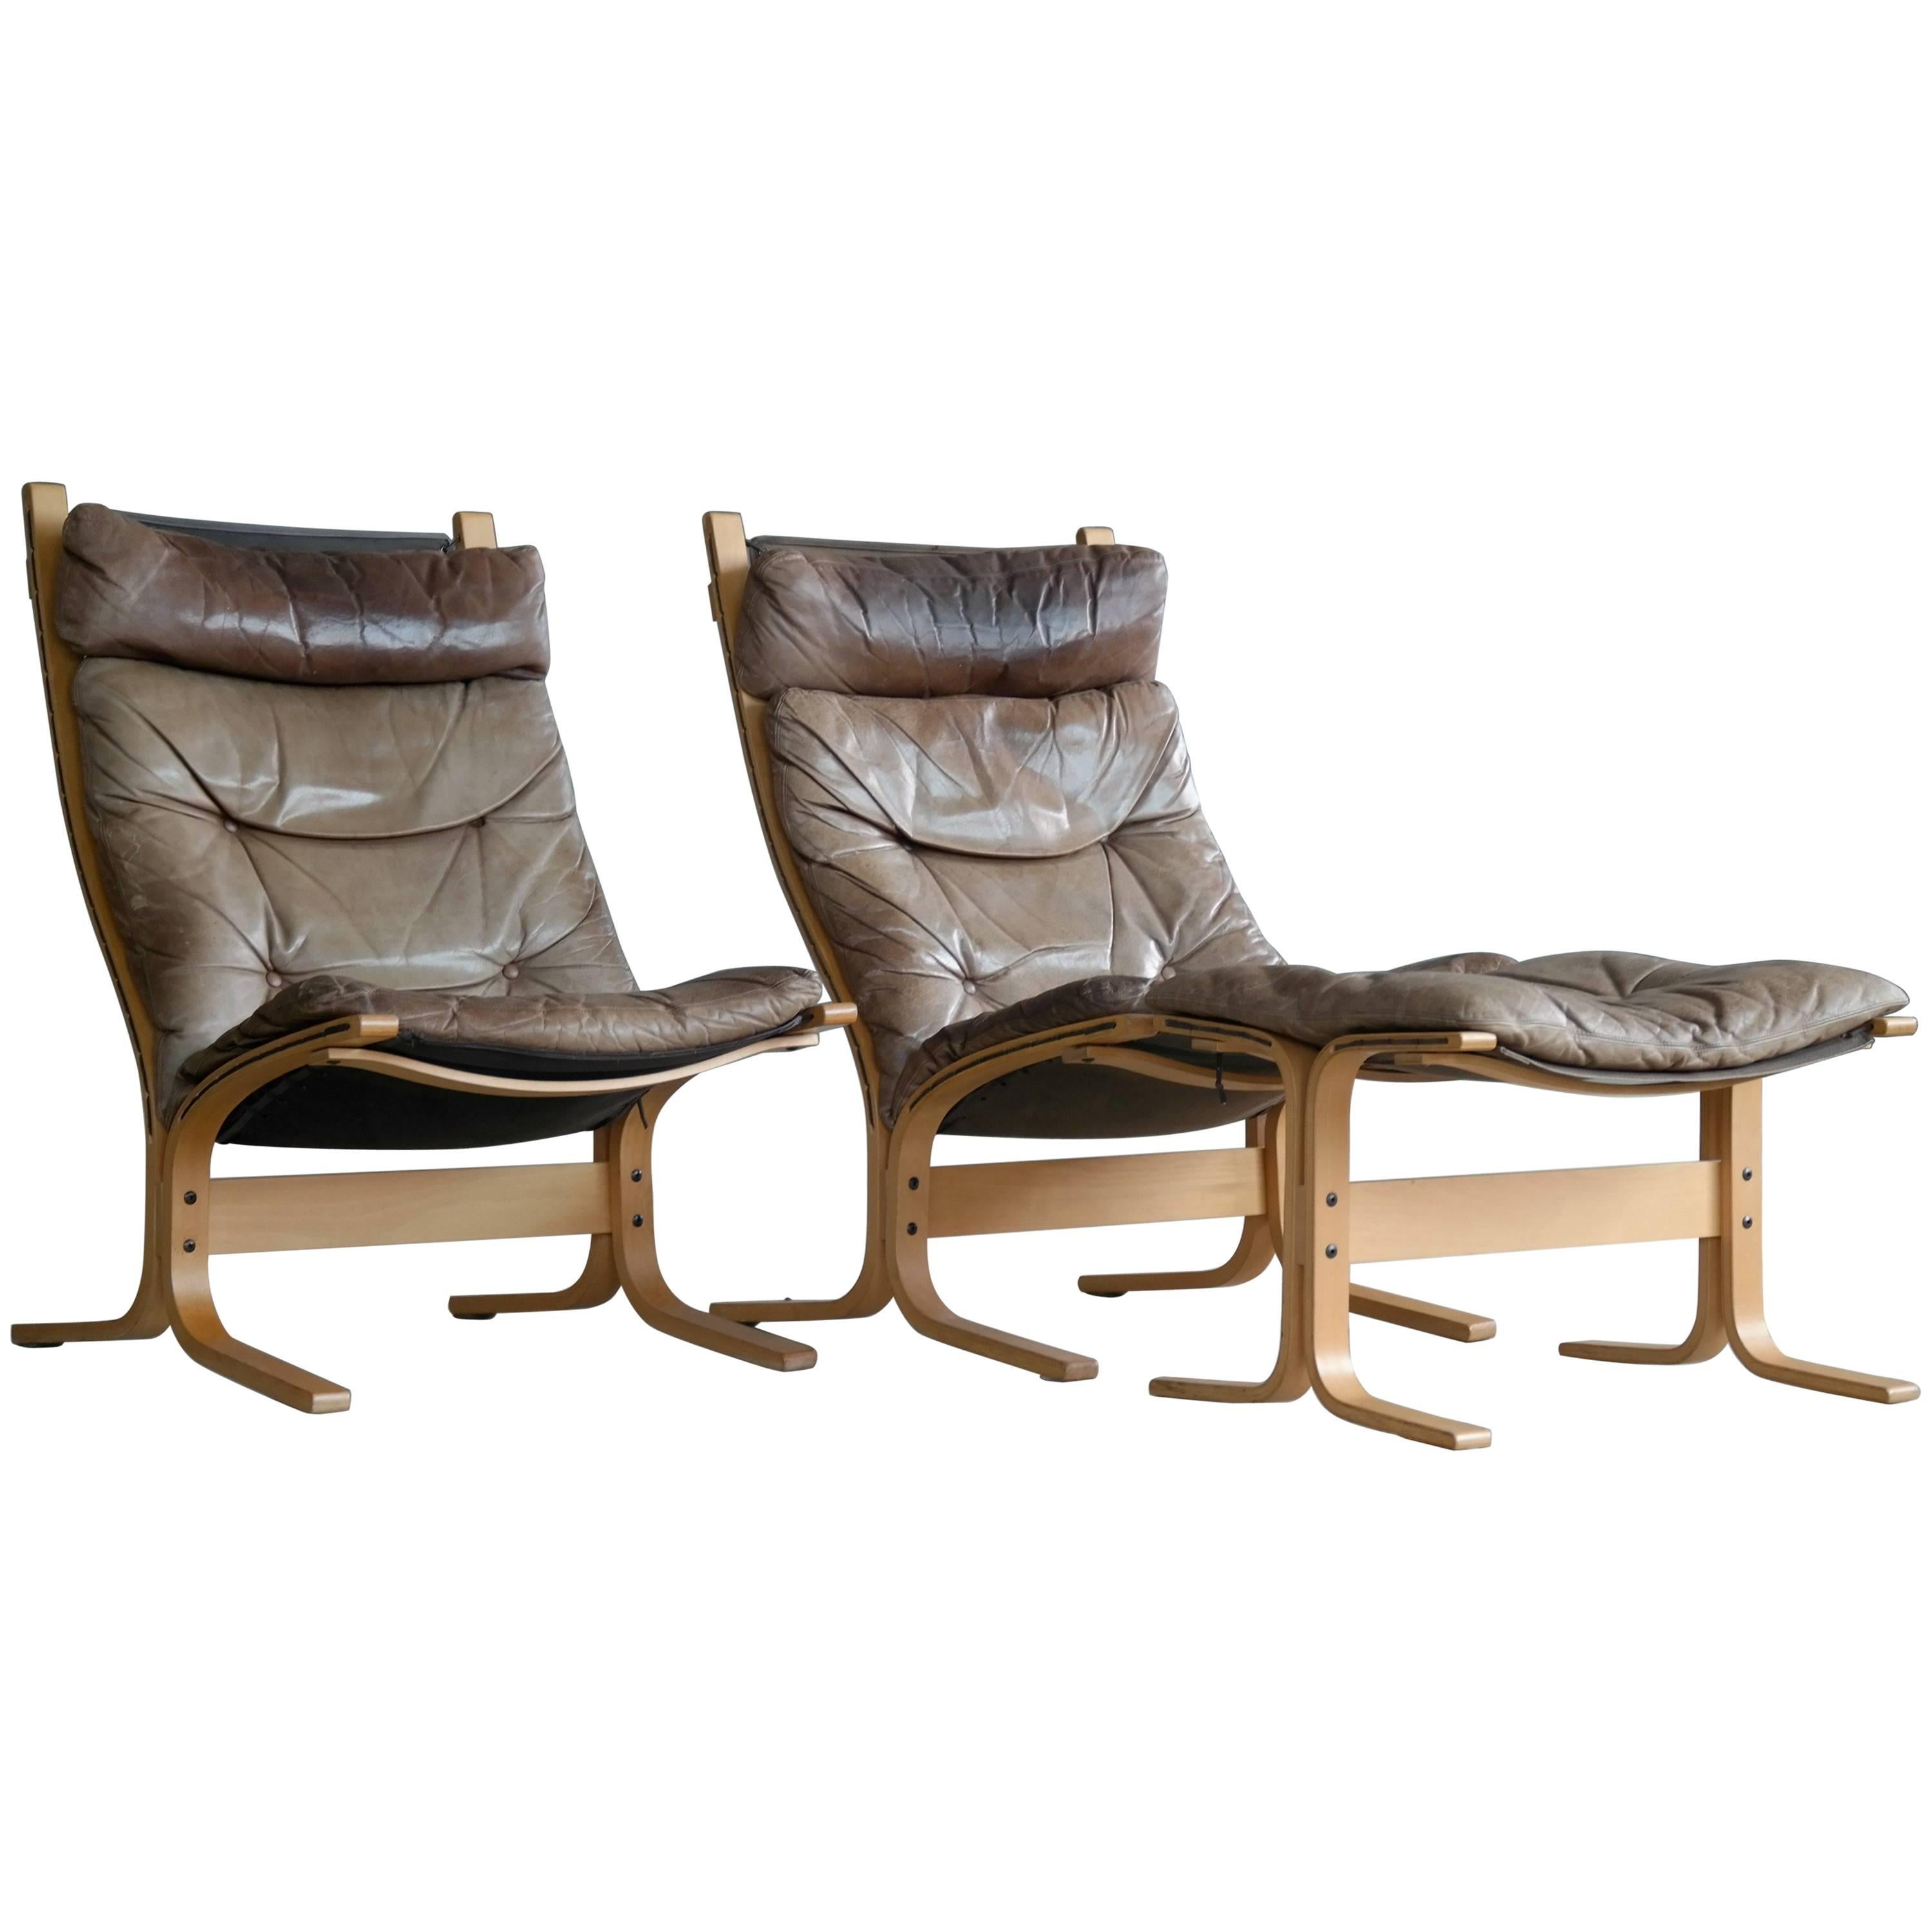 Ingmar Relling Pair of Siesta Chairs for Westnofa Patinated Leather, Norway